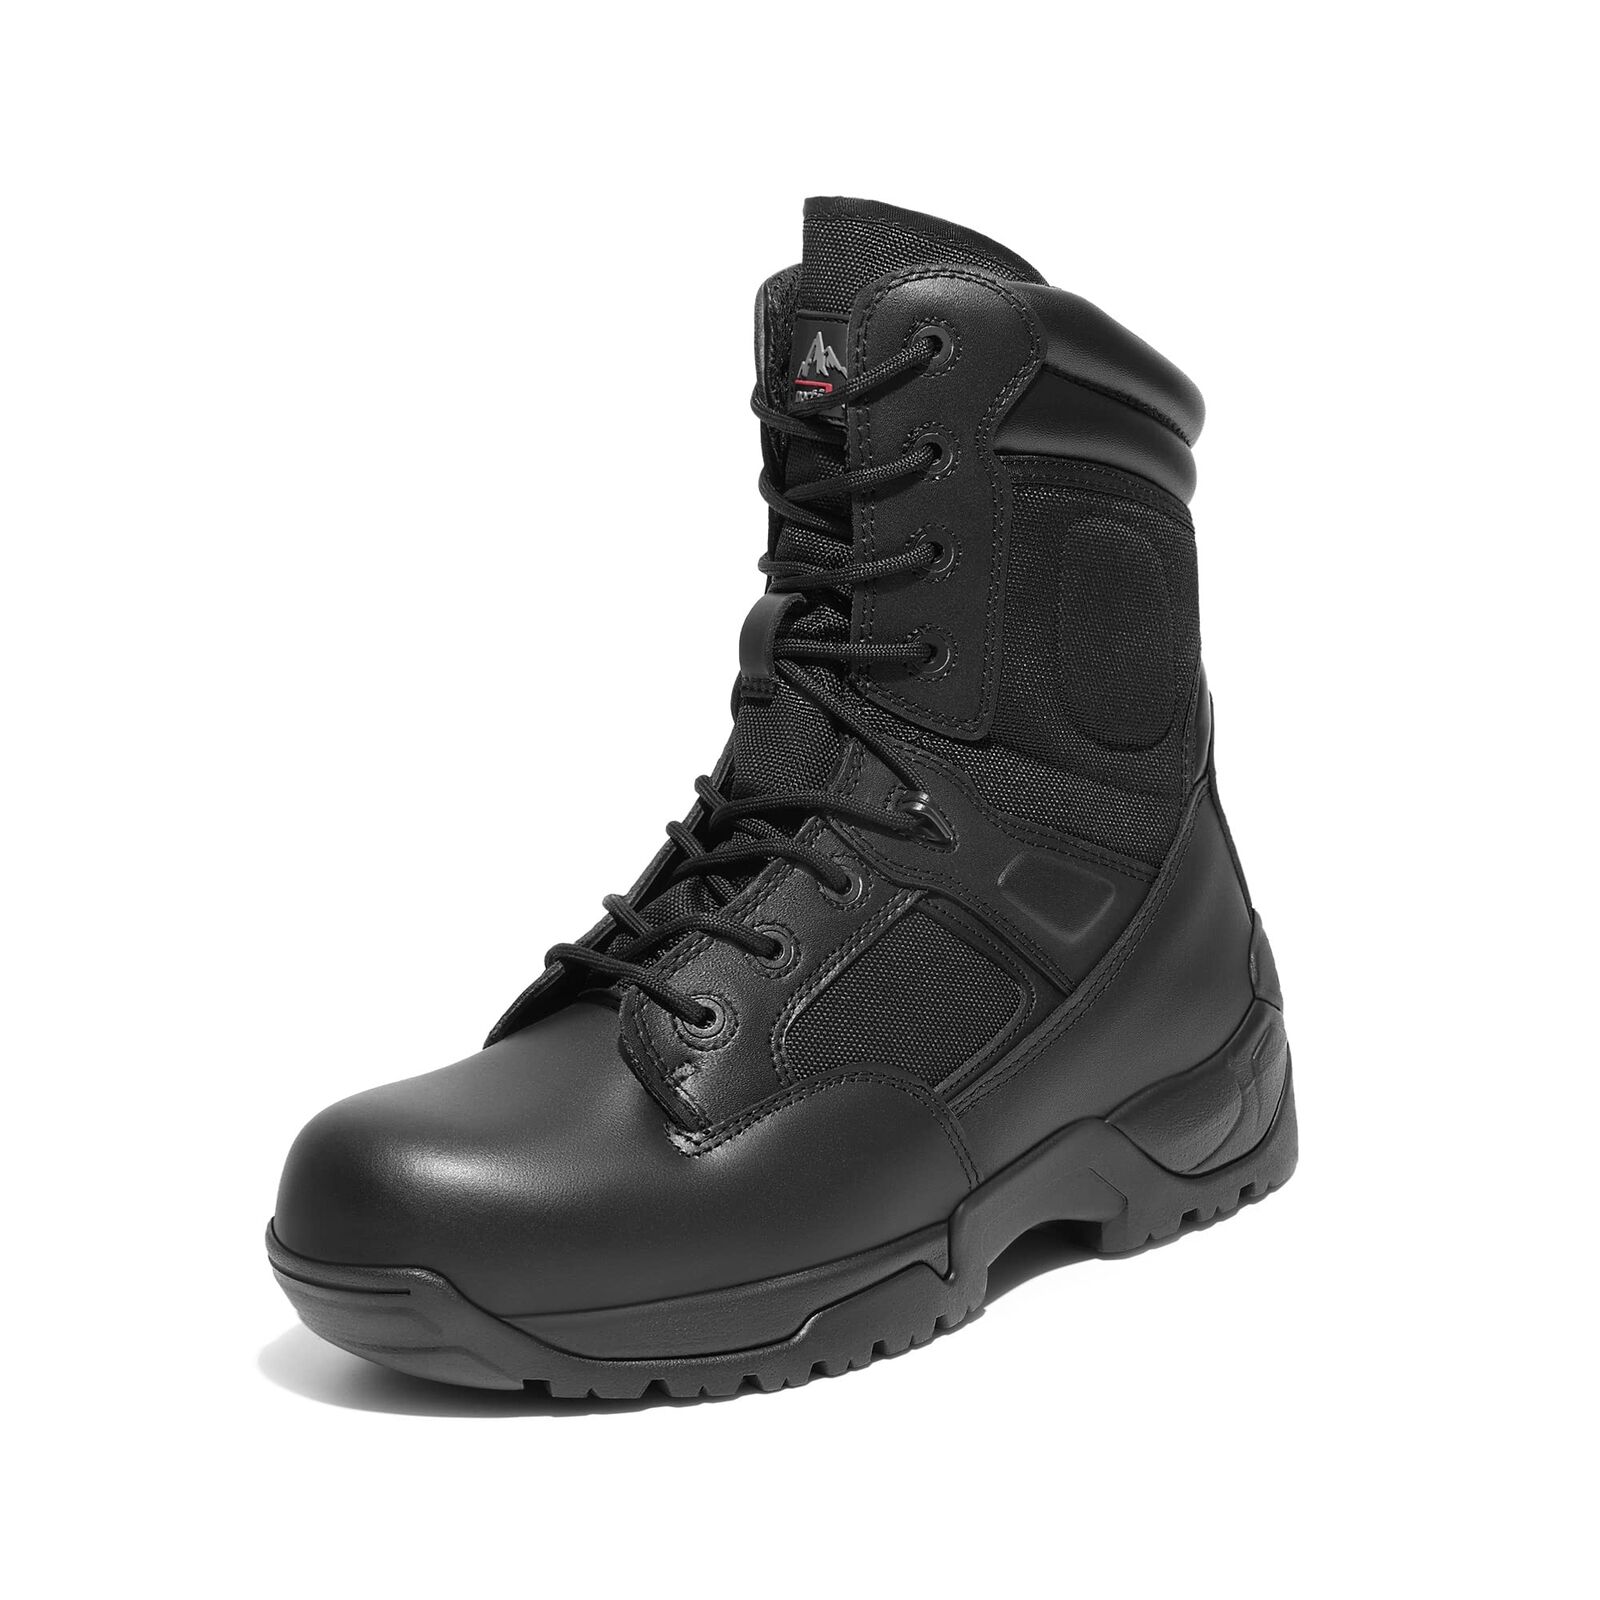 NORTIV 8 Men's Safety Steel Toe Work Boots Industrial Anti-Slip Tactical Boots